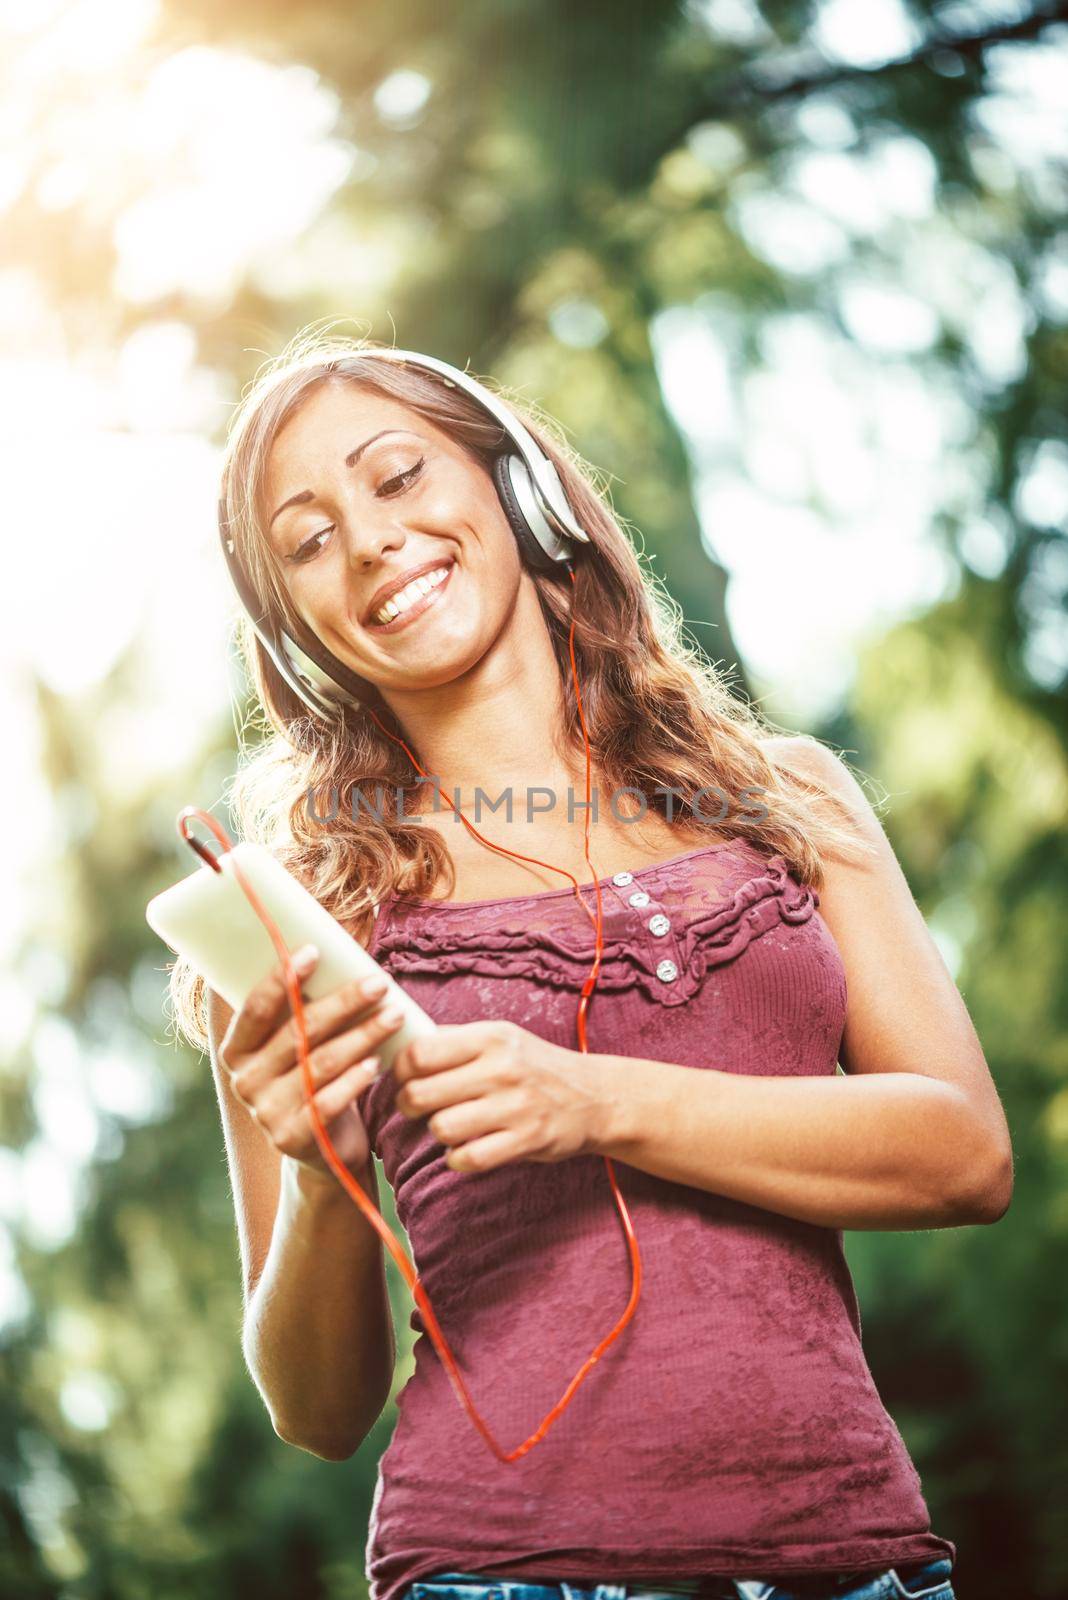 Woman relaxes with headphones listening to music sitting in park. She is doing selfie on her smartphone